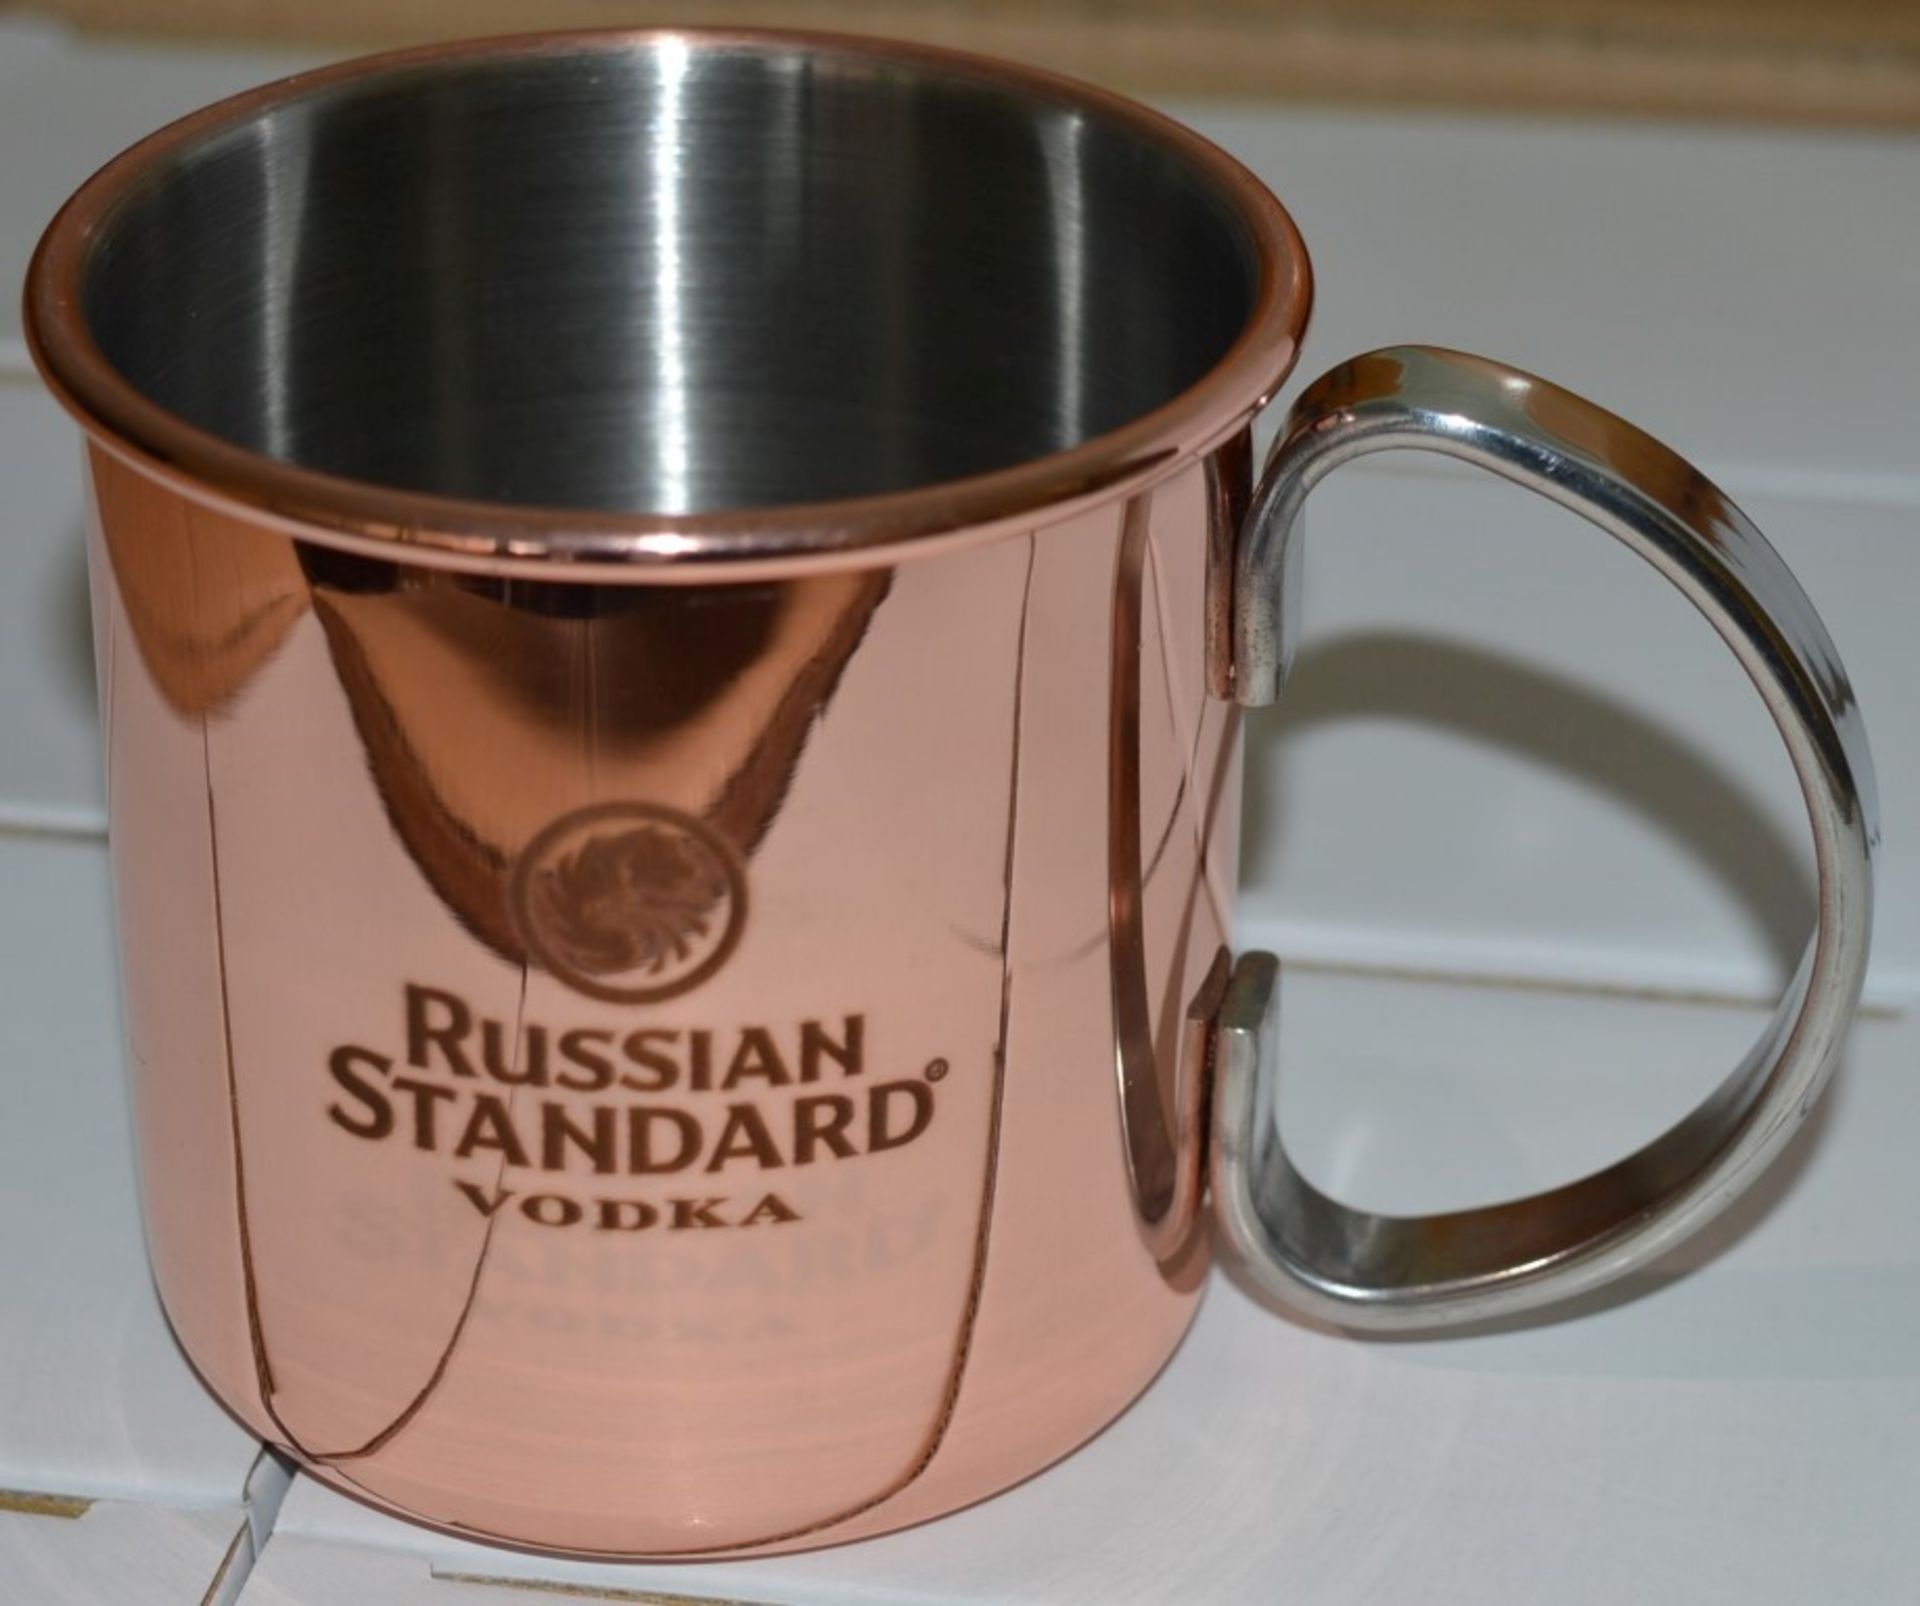 48 x Russian Standard Vodka Copper Mugs - Brand New Boxed Promotional Stock - CL090 - Ref BL058 US -